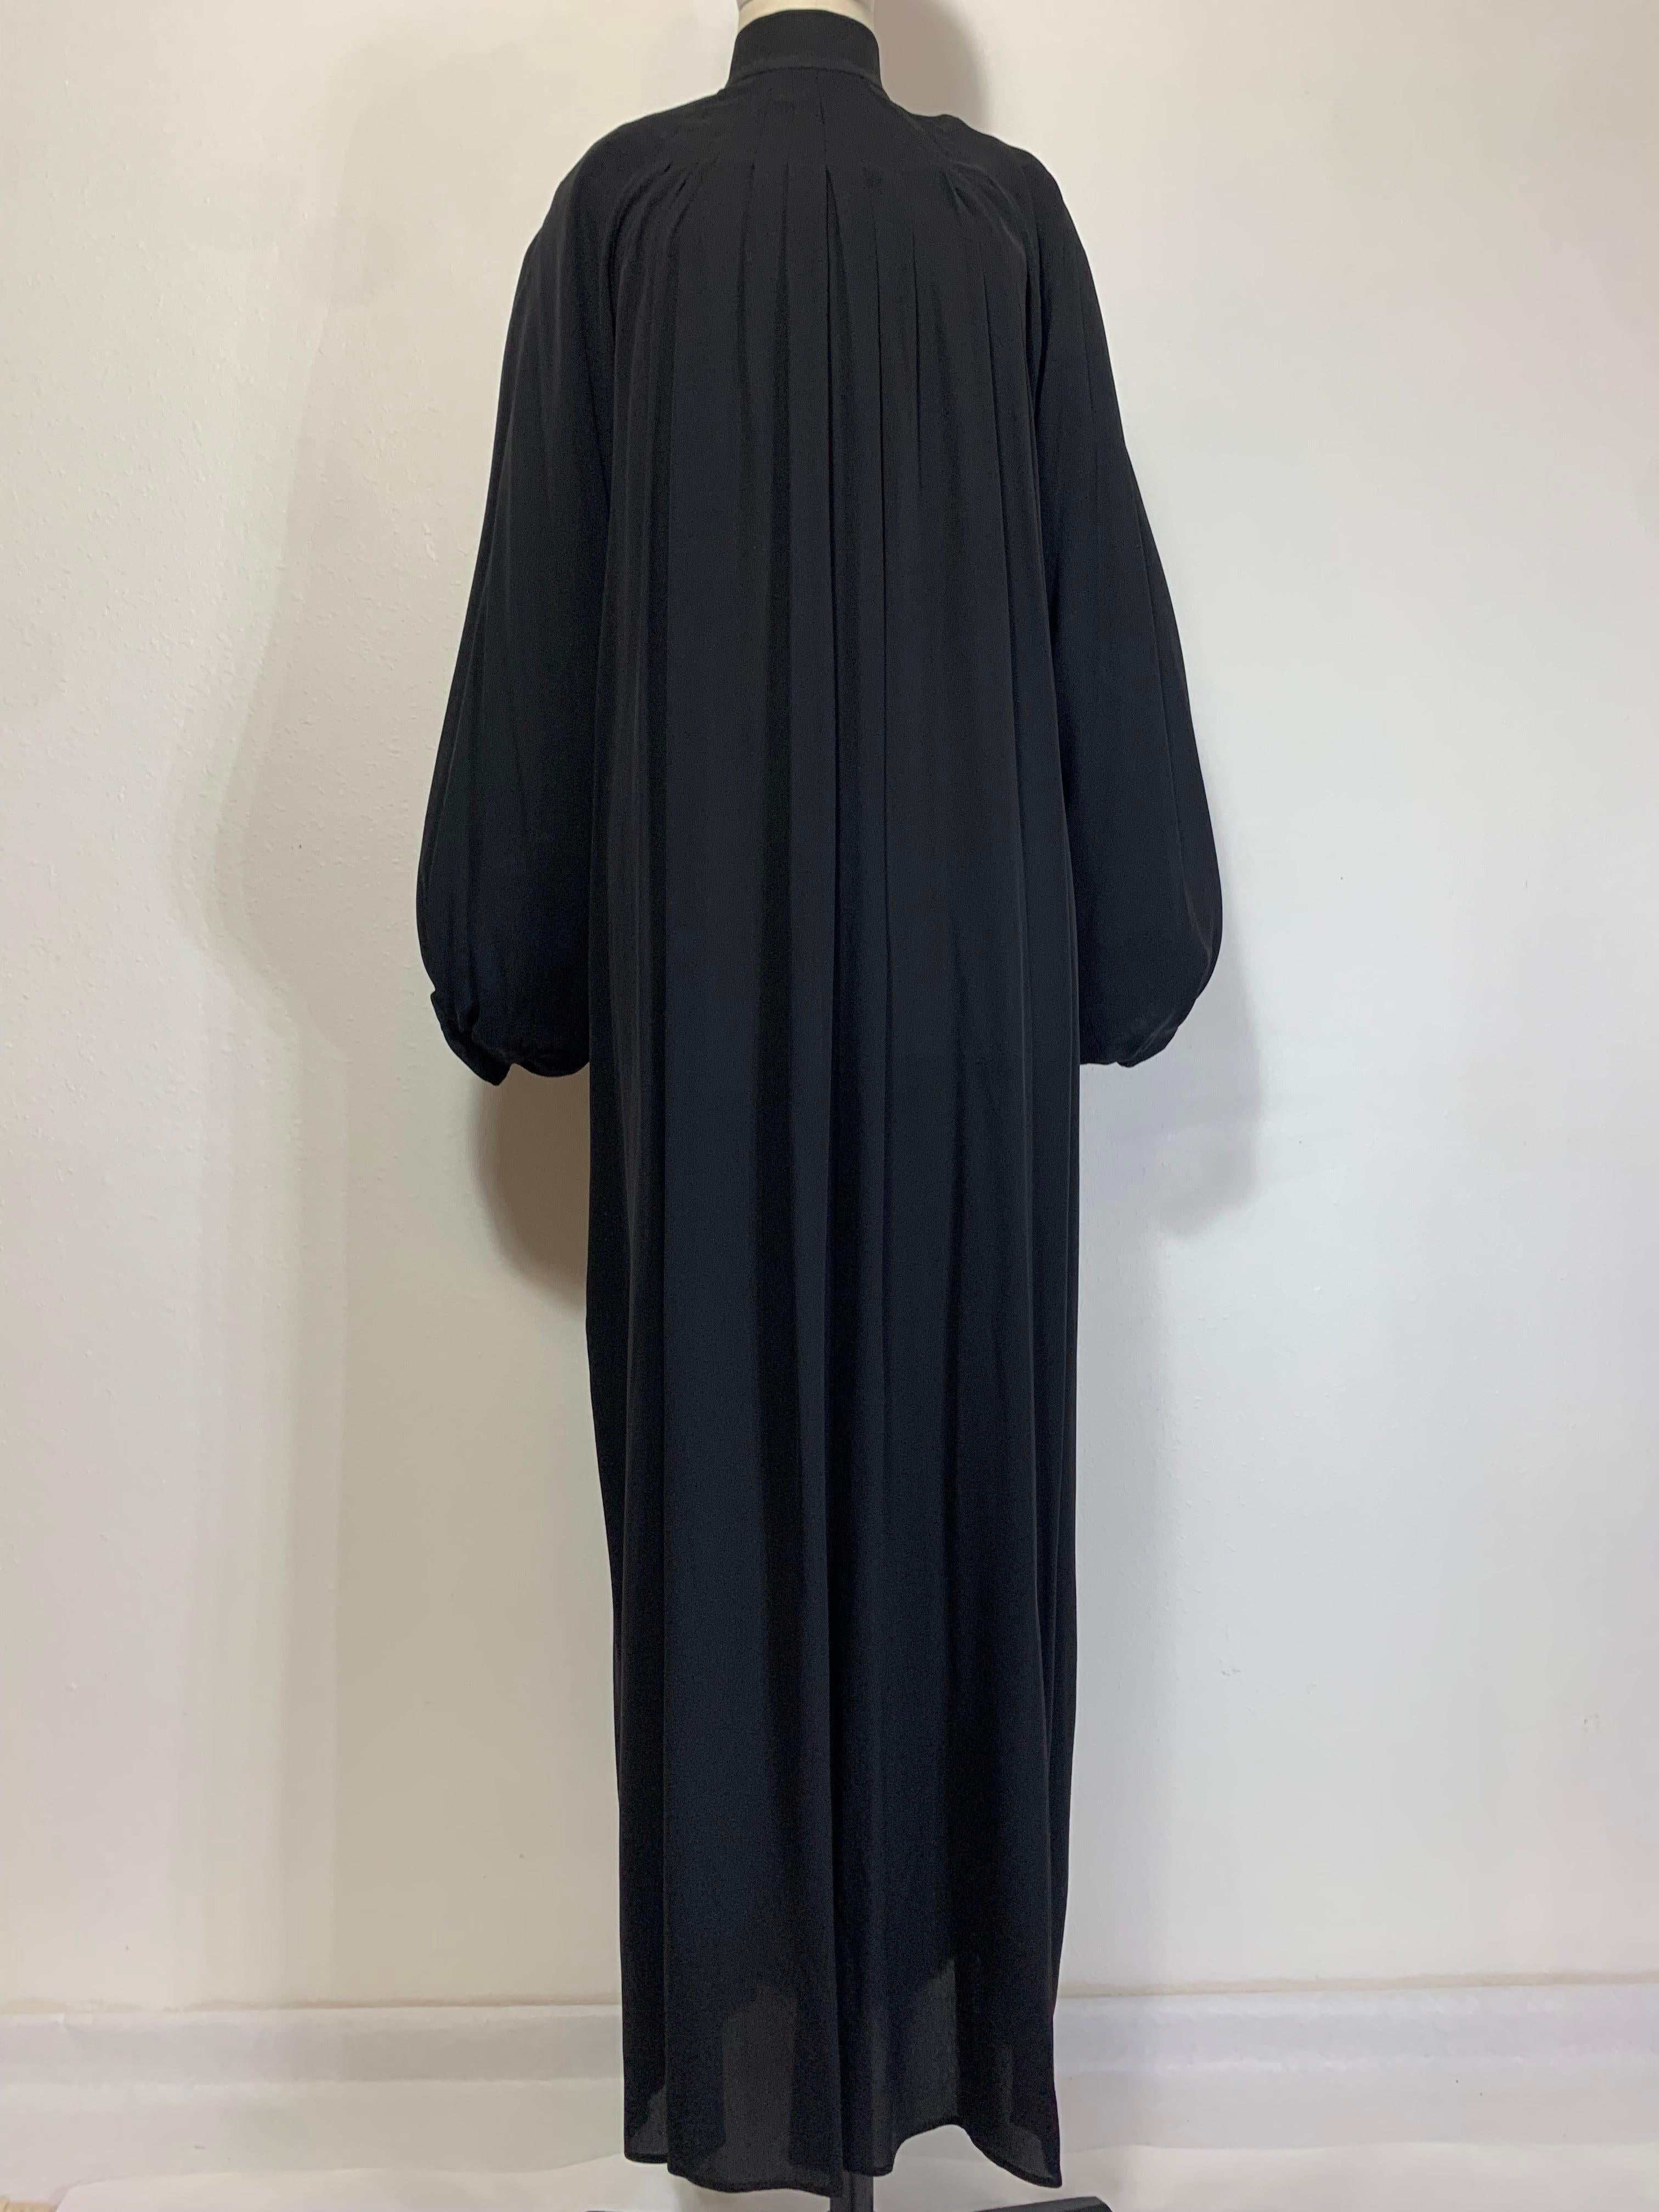 Andrew Gn Black Silk Crepe Monastic-Styled Maxi Dress w Full Pleats & High Neck  In Excellent Condition For Sale In Gresham, OR